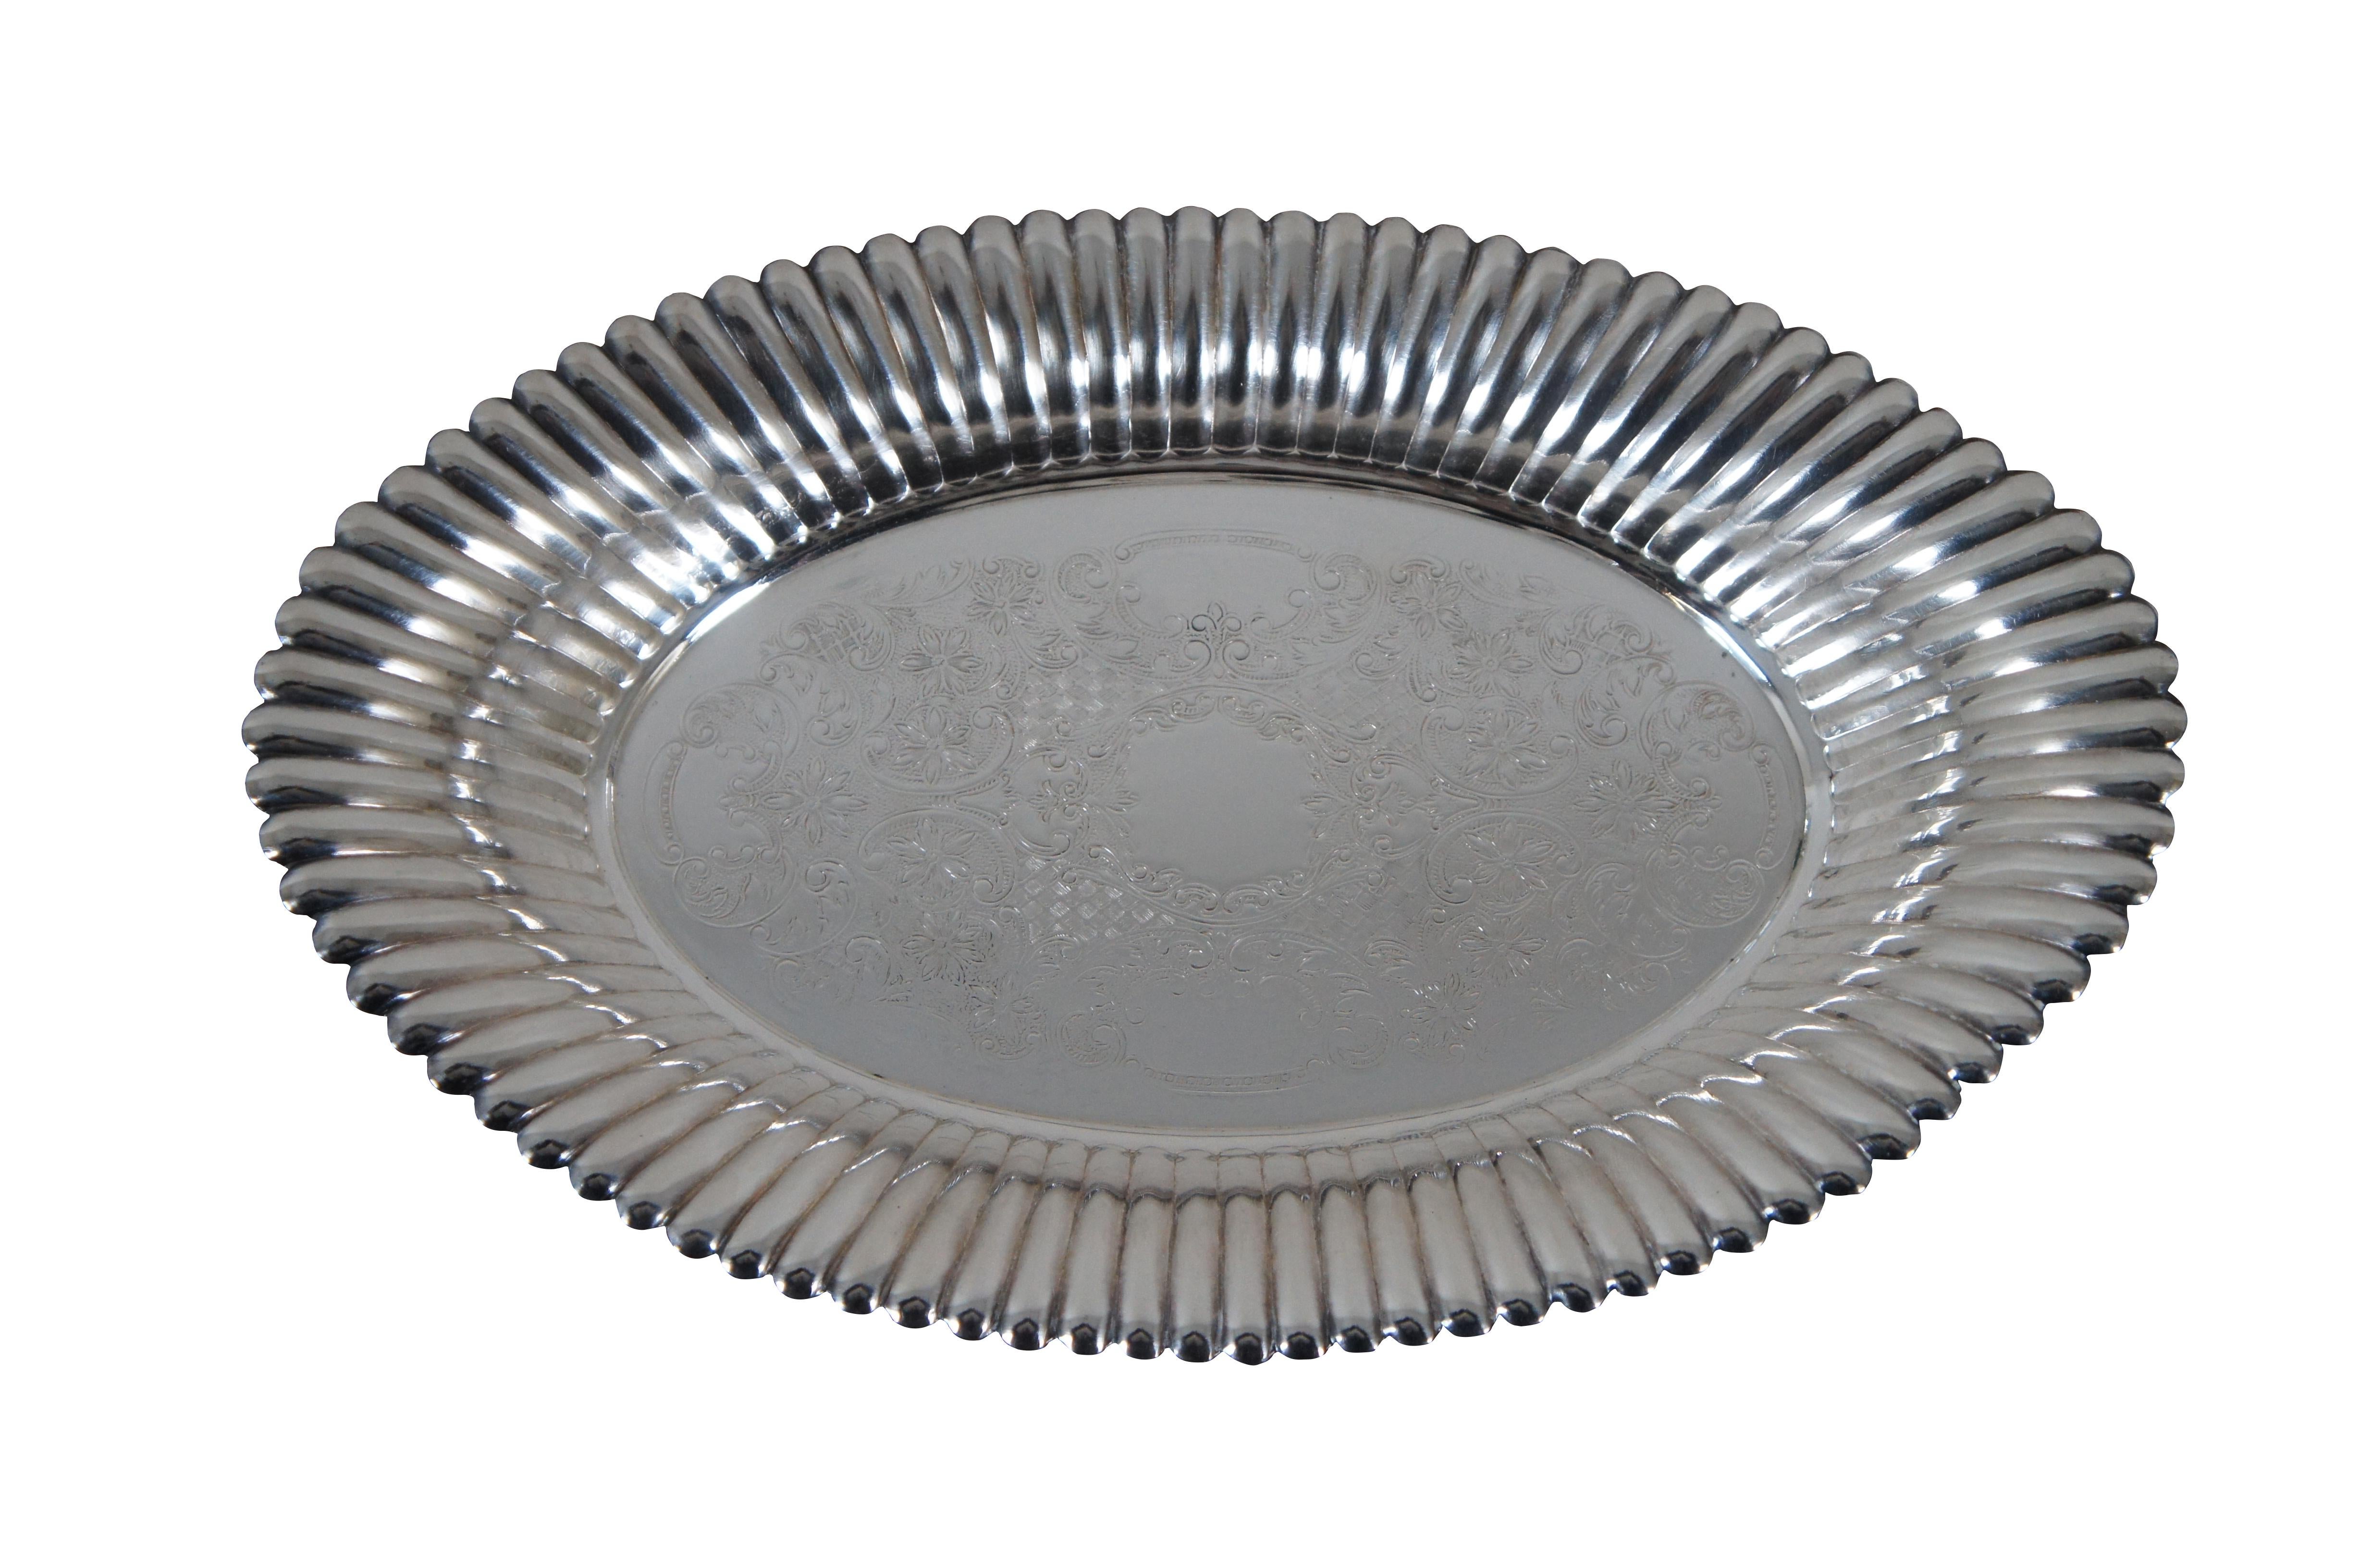 Set of 3 vintage assorted silverplate serving dishes. Wilcox Silver Plate Co / International silver Co. Beverly Manor N7062 footed bon bon / nut dish. Wallace Avalon Silverplate 1450 oval dish with fluted sides. And a small card tray / platter